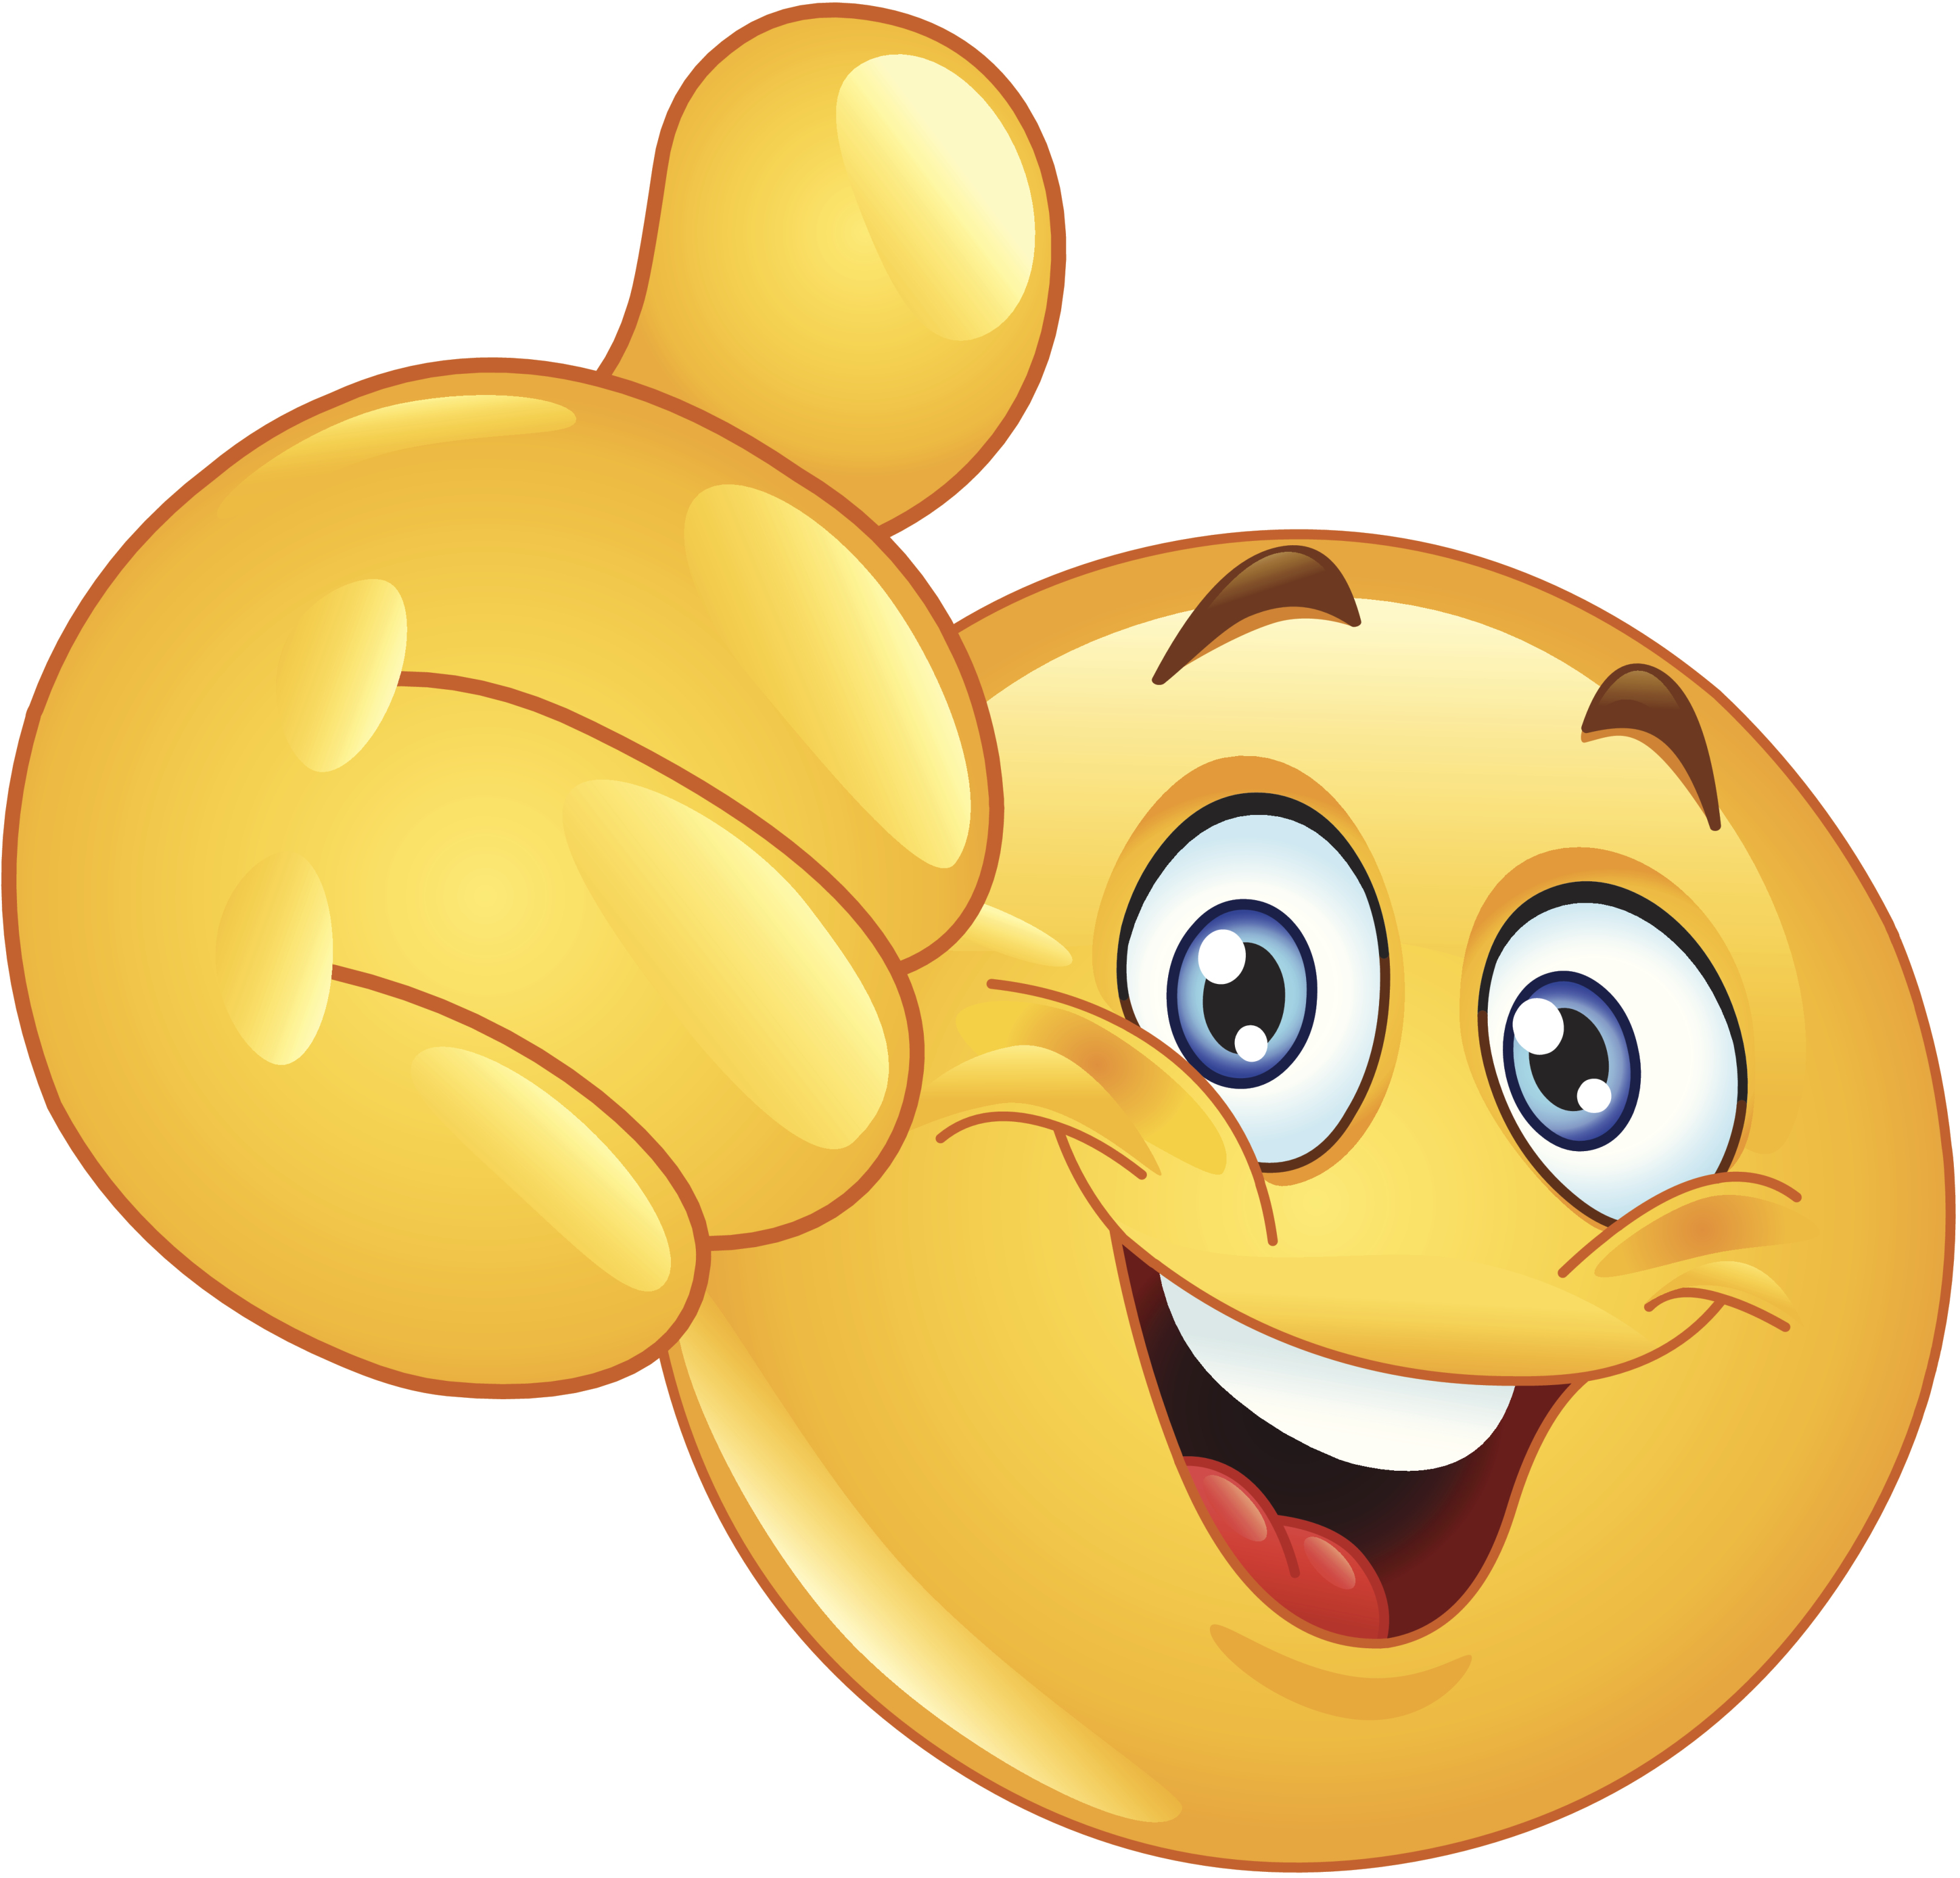 Animated Smiley Faces Thumbs Up - ClipArt Best